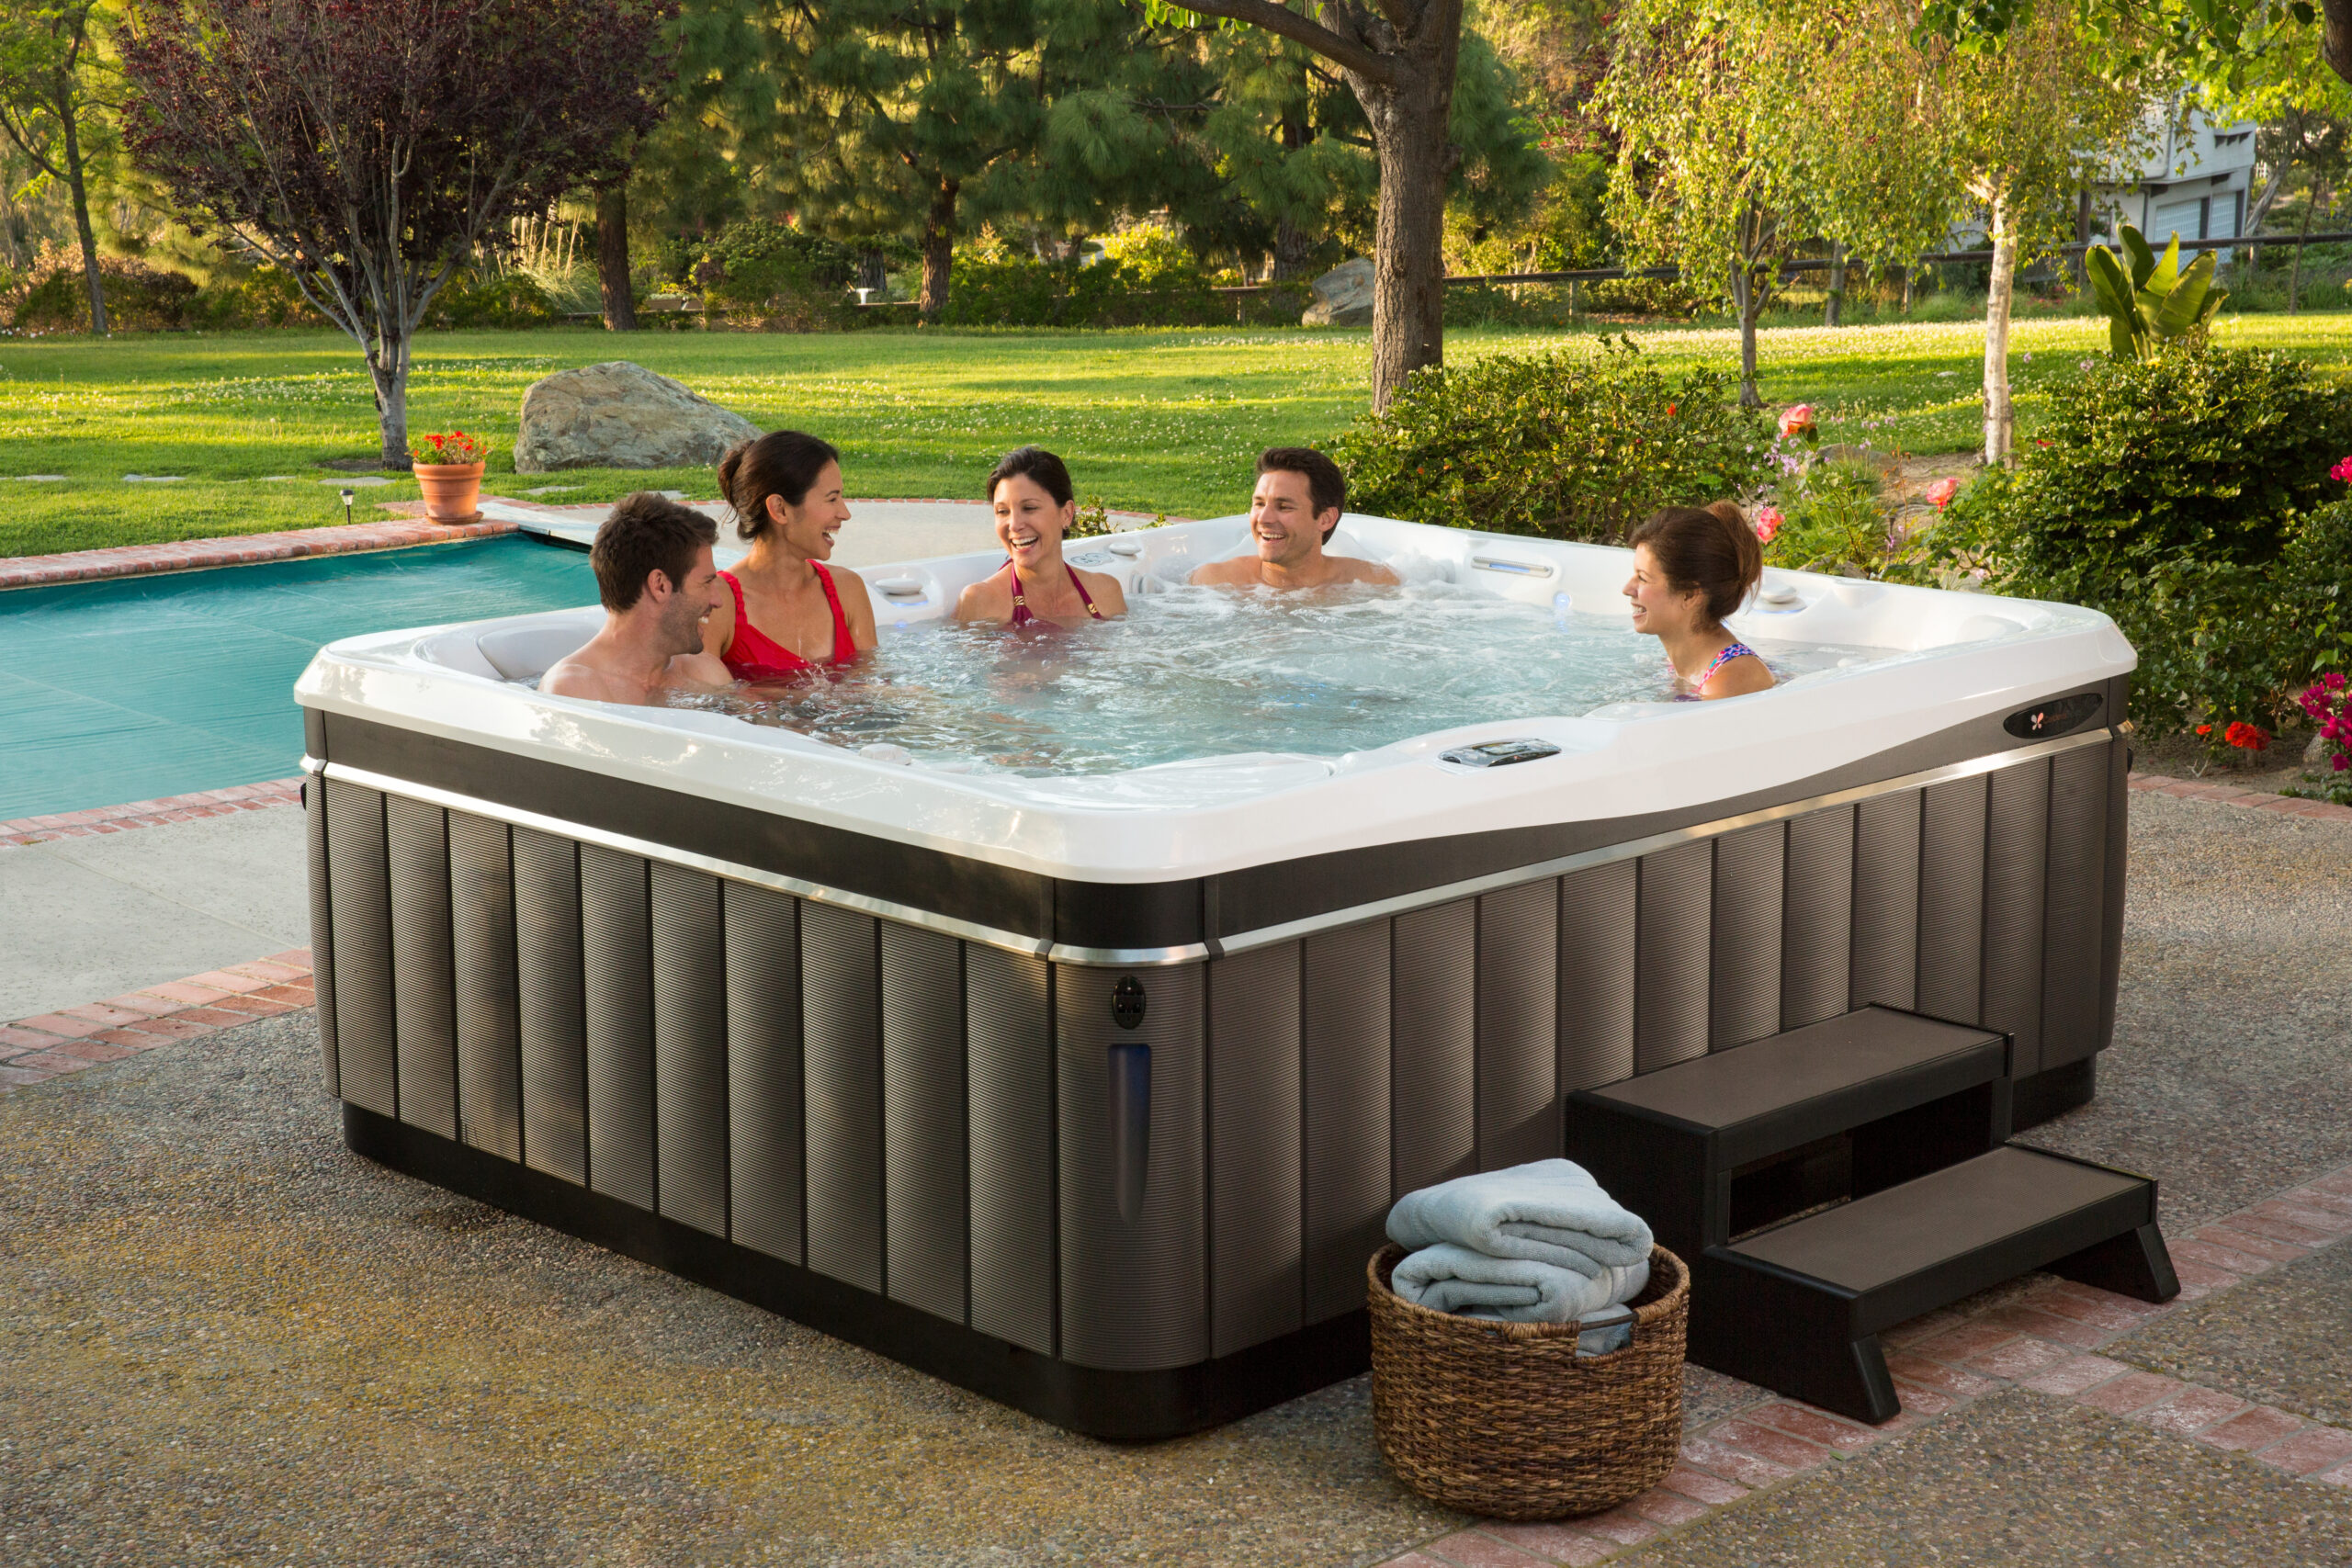 People sitting in hot water tub.